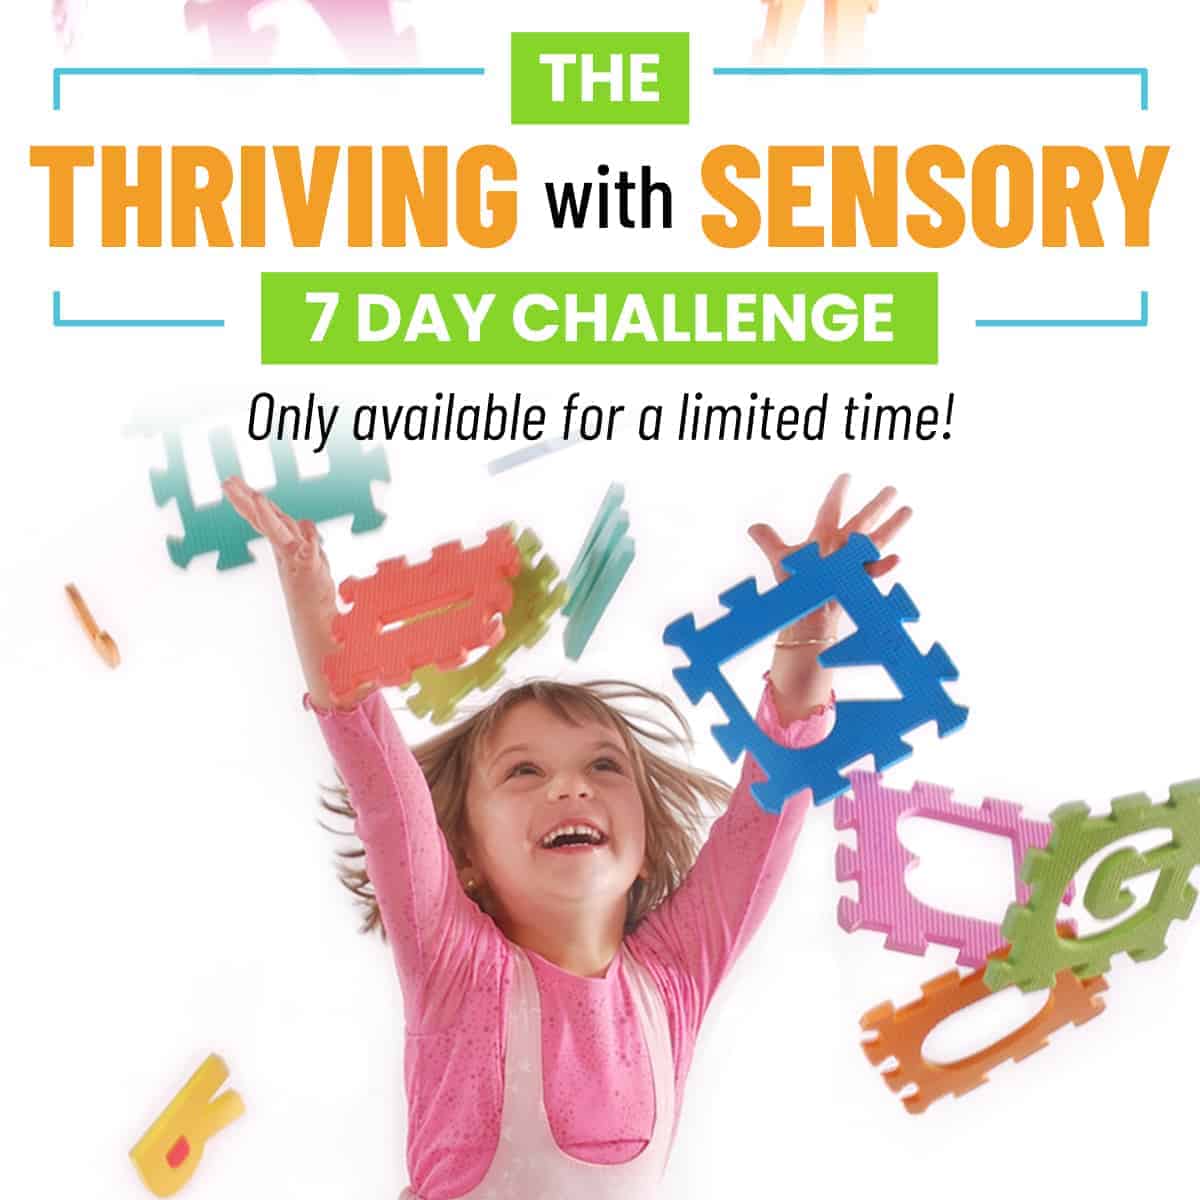 Learn the important symptoms and signs of sensory processing disorder in toddlers and children from an occupational therapist, and how to get a diagnosis and treatment options for SPD. 